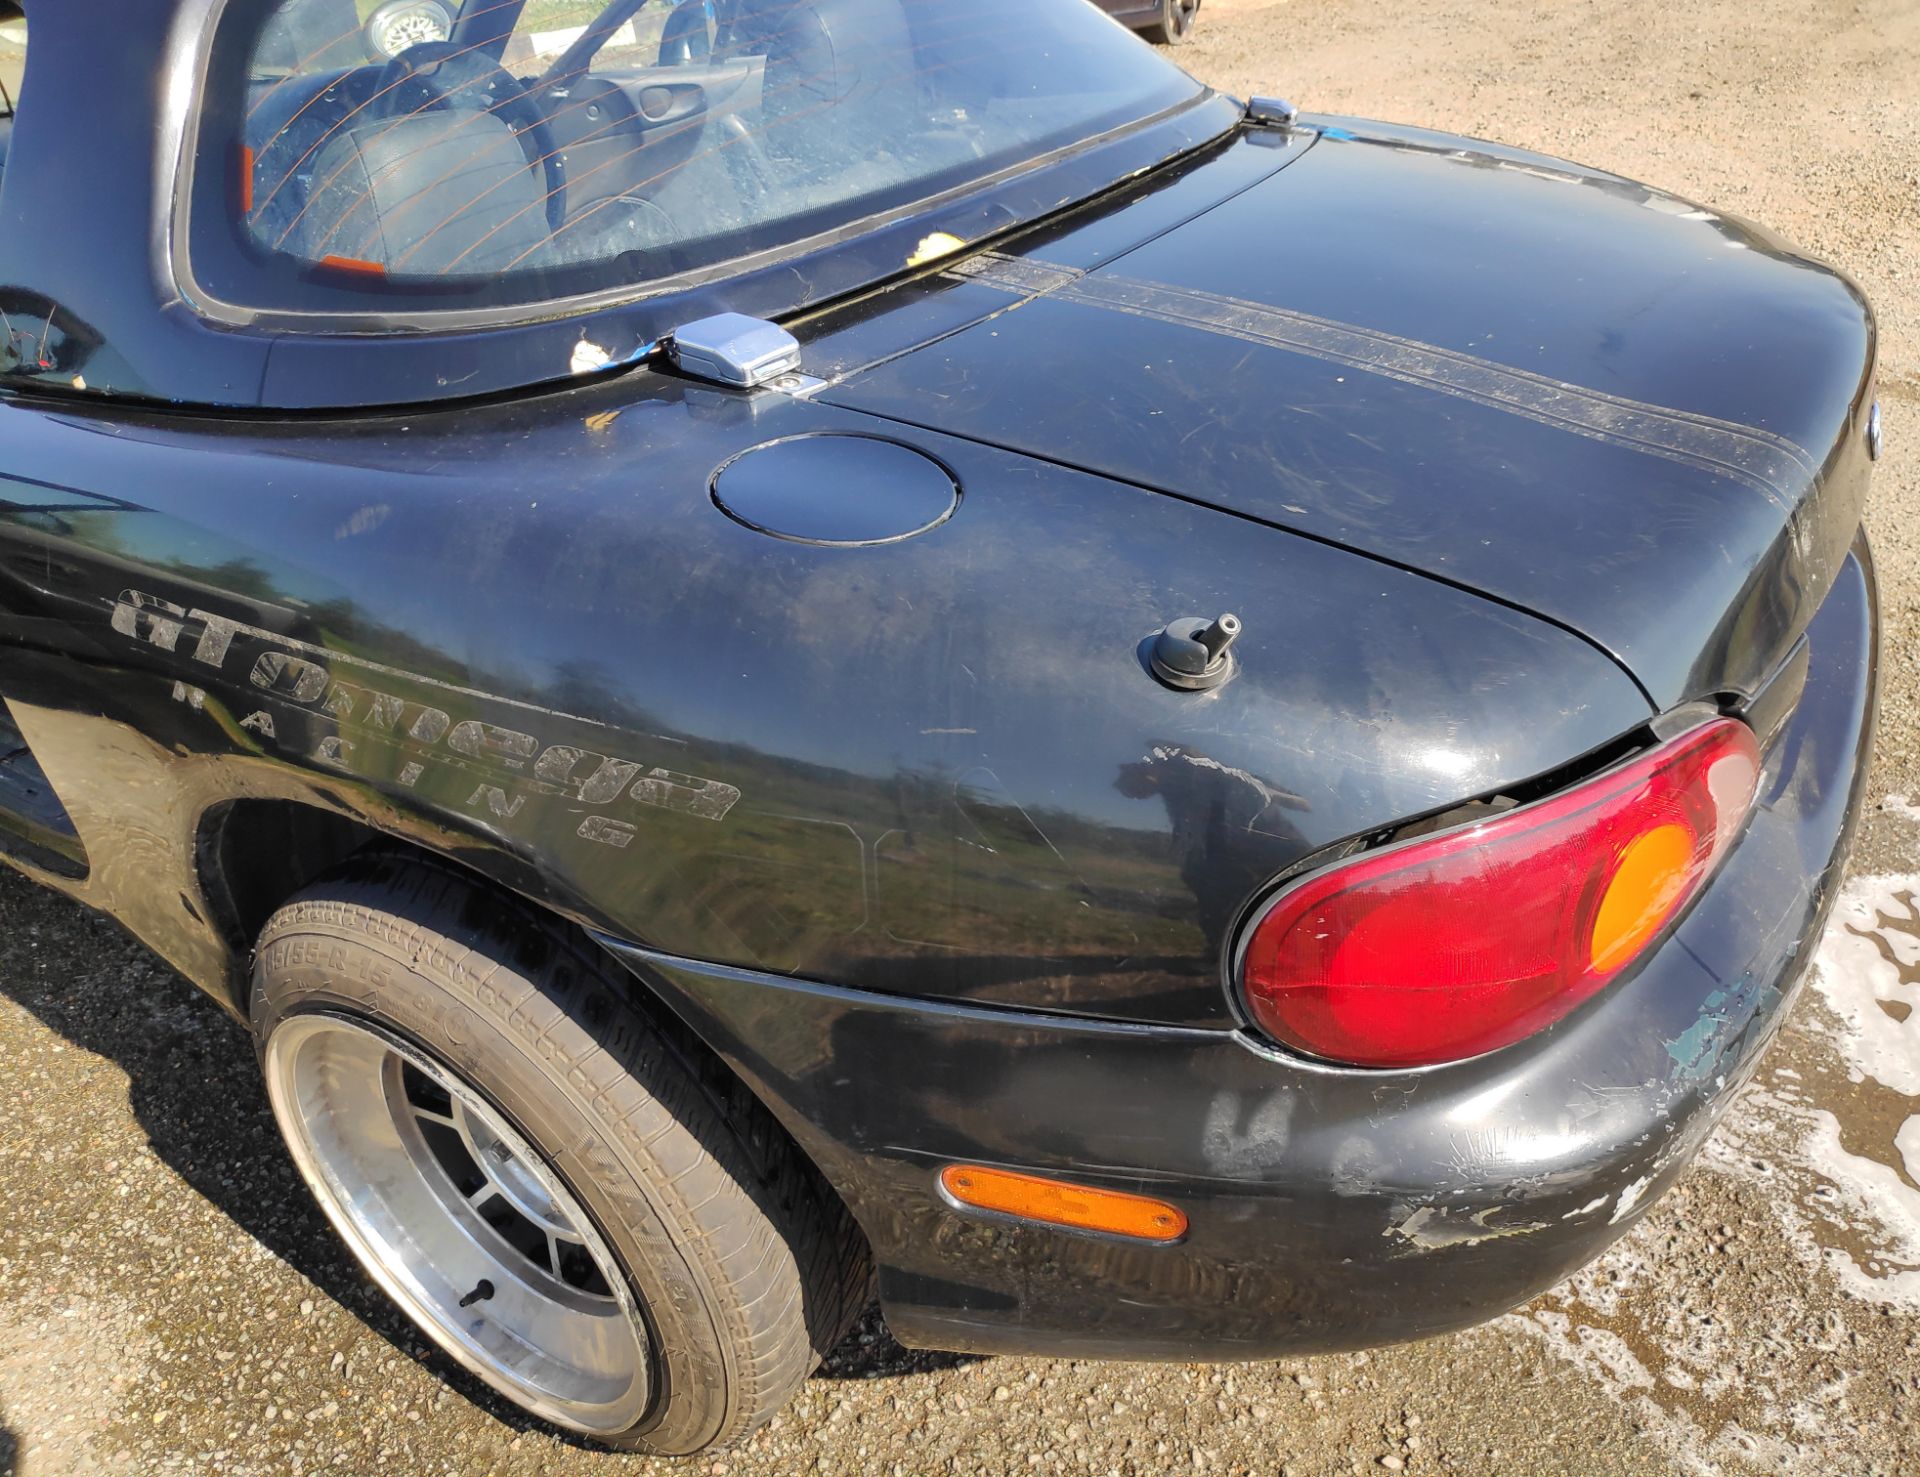 1 x 2000 Mazda MX5 Mk2 Drift Car - Includes 3 Extra Wheels/Tyres - Ref: T4 - CL682 - Location: Bedfo - Image 59 of 77